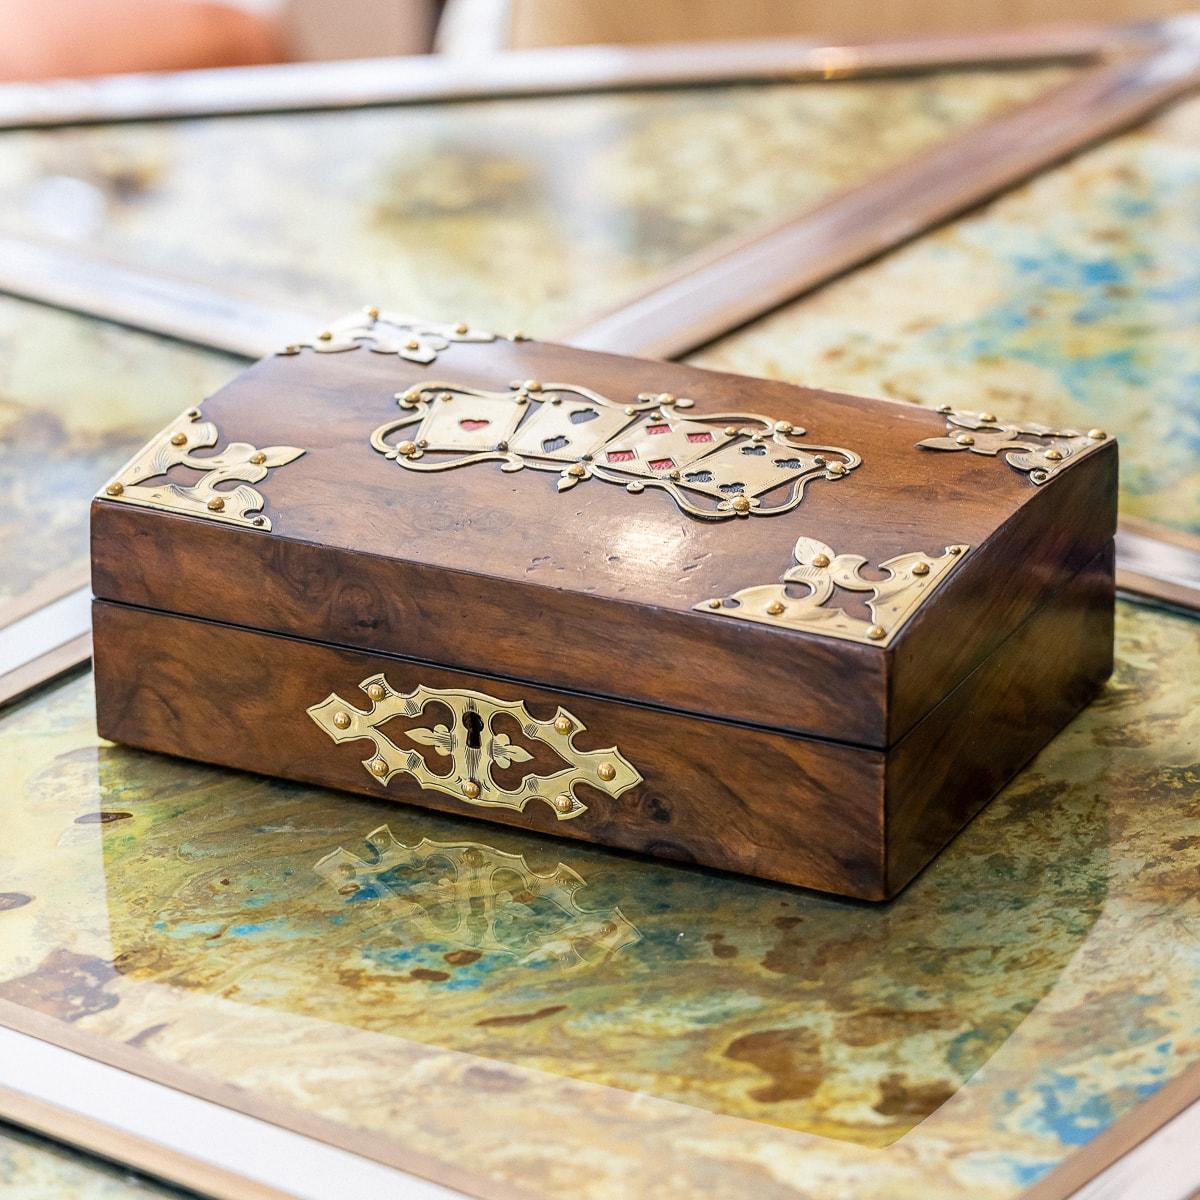 Antique late-19th Century Victorian walnut cased games compendium. The box itself is protected by a lock and key, the lid applied with decorative brass playing cards, surrounded by corner decorations in the complimentary style. The interior